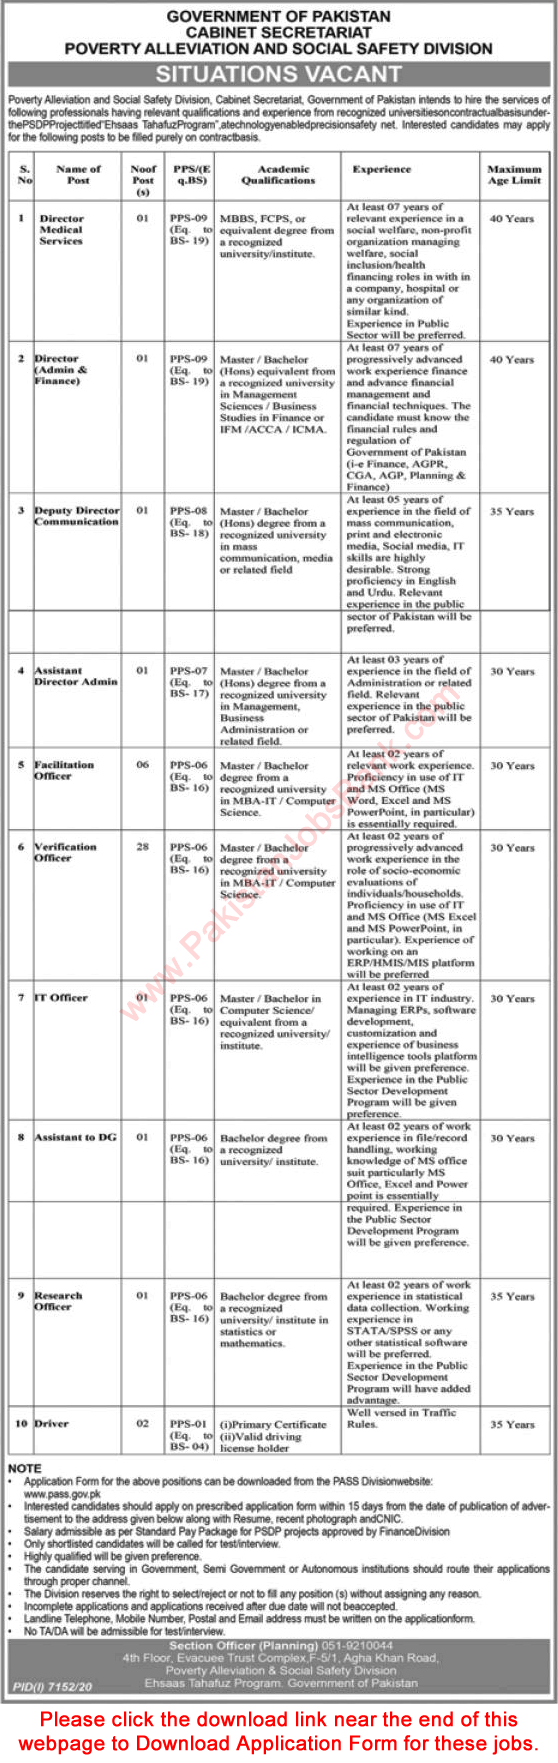 Poverty Alleviation and Social Safety Division Islamabad Jobs June 2021 July Application Form Verification Officers & Others Latest